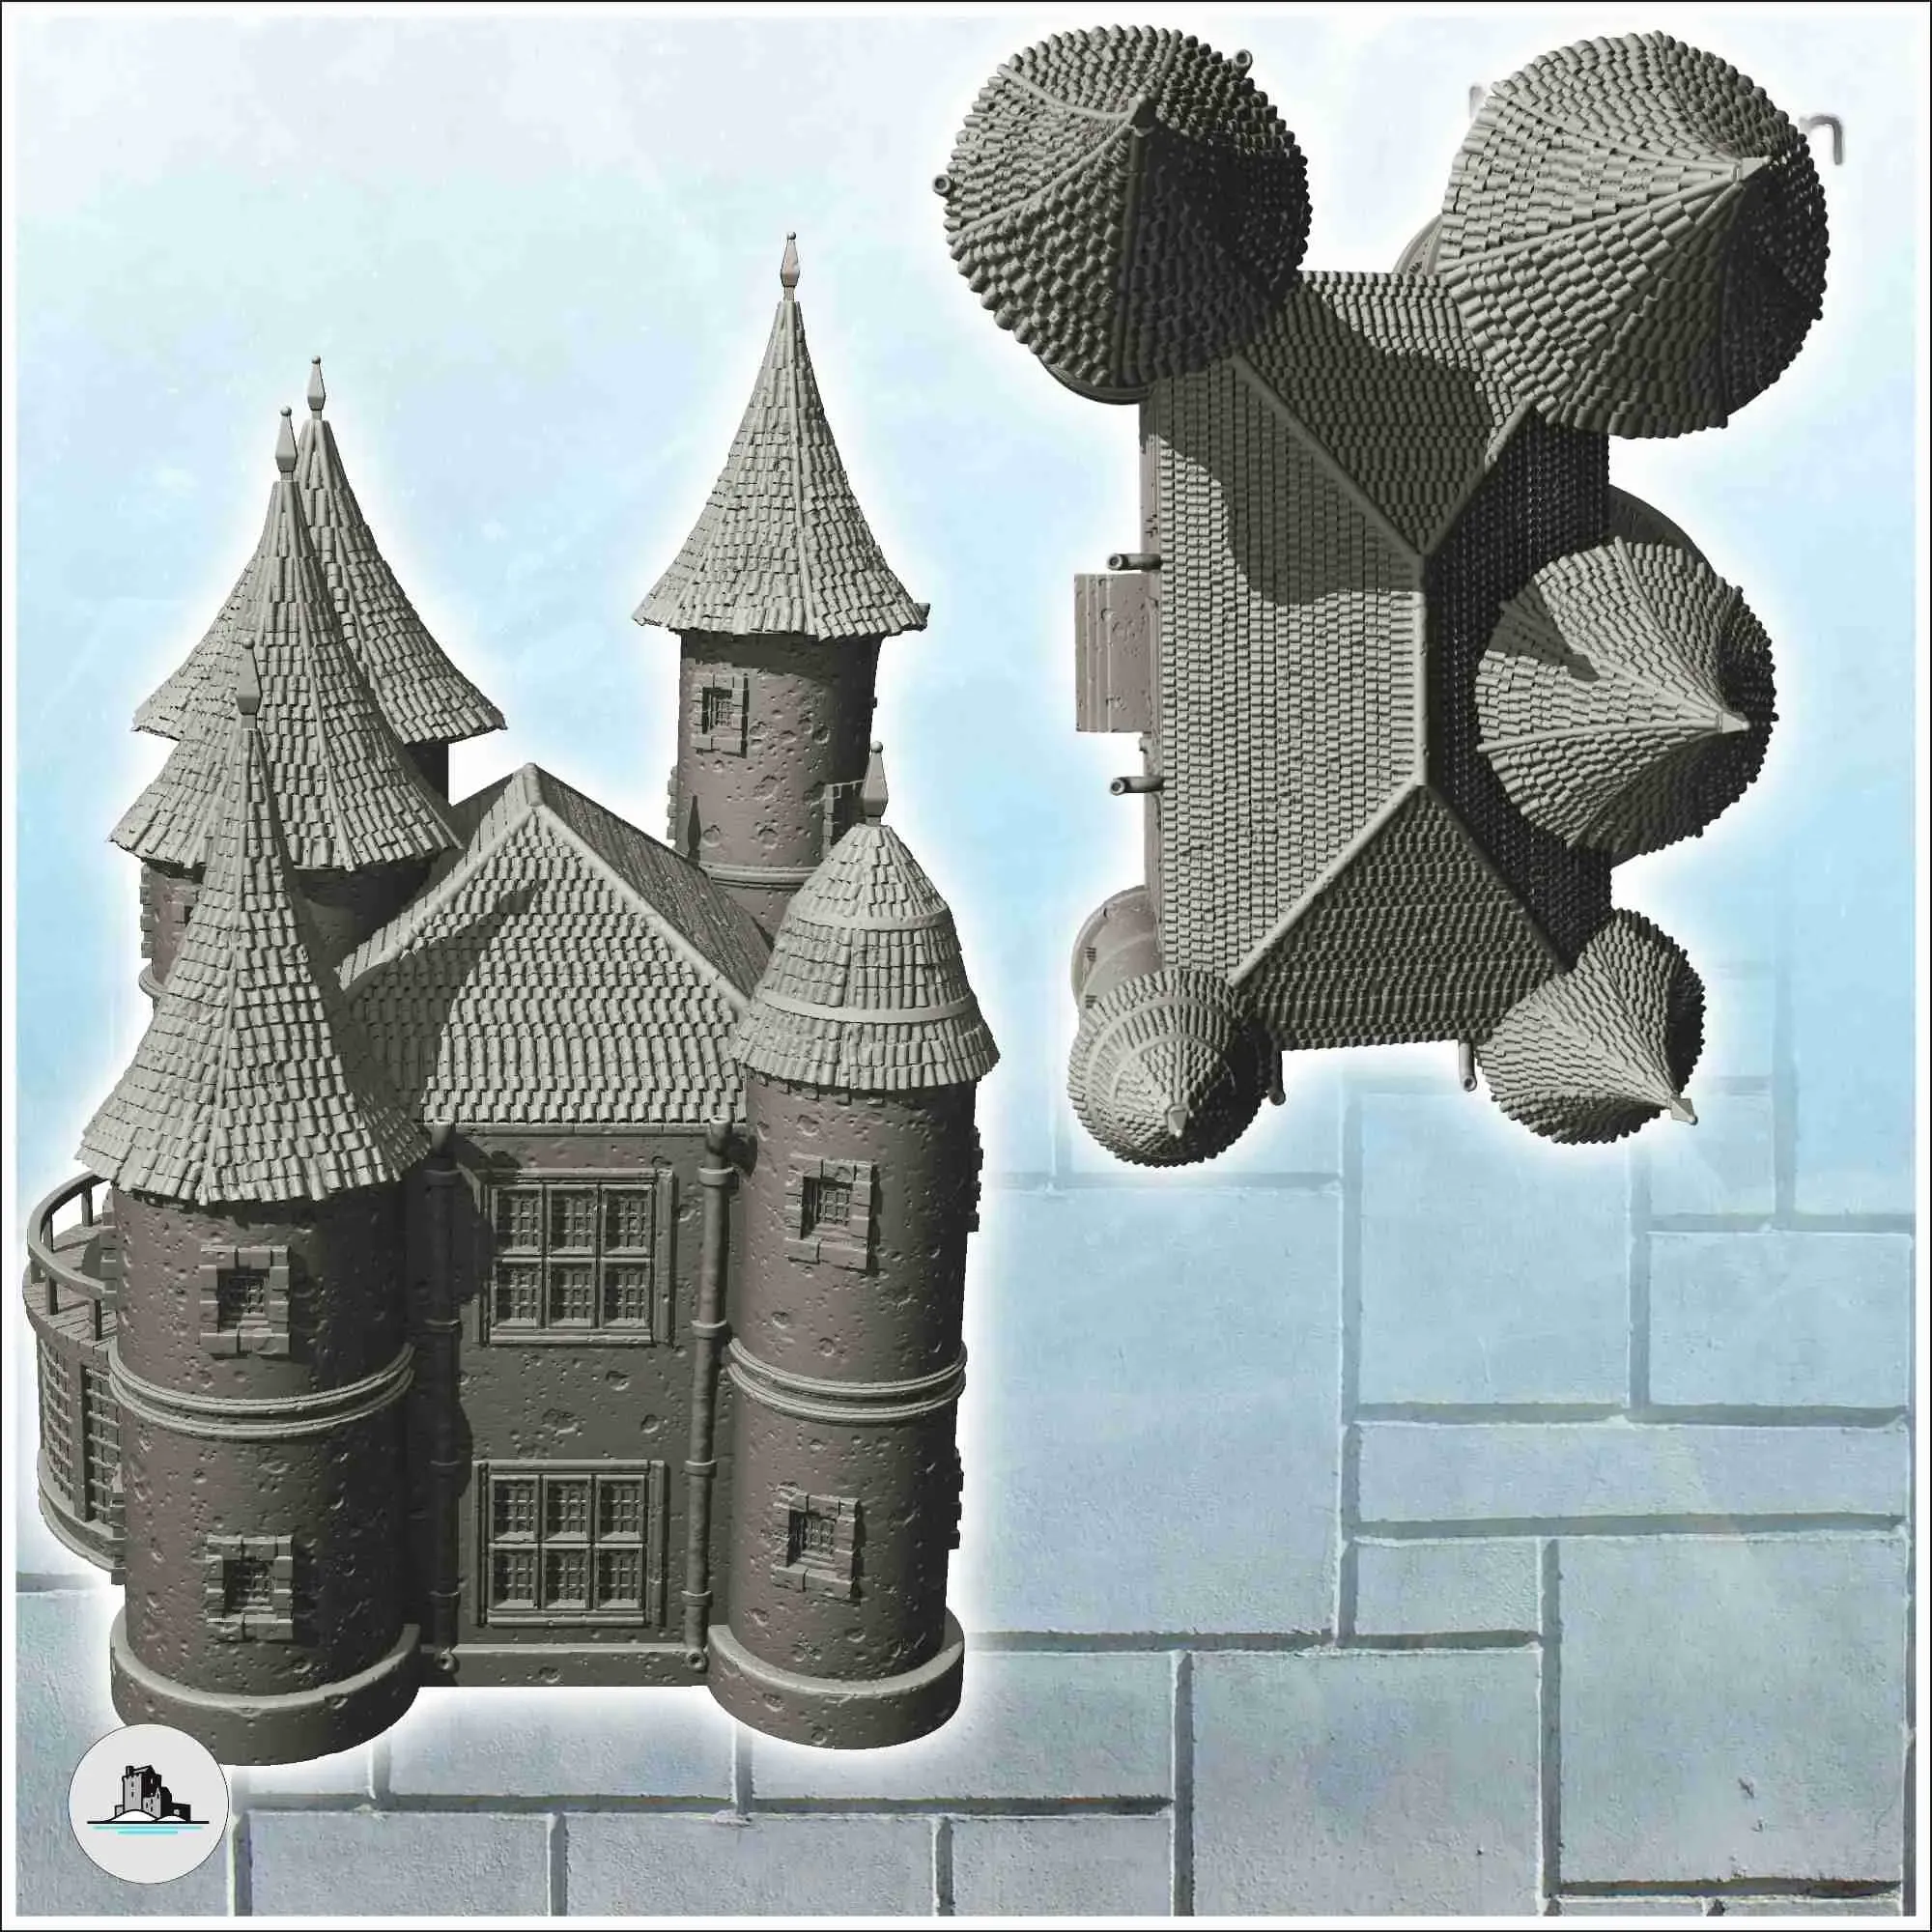 Large modern castle with double towers and entrance stairs (